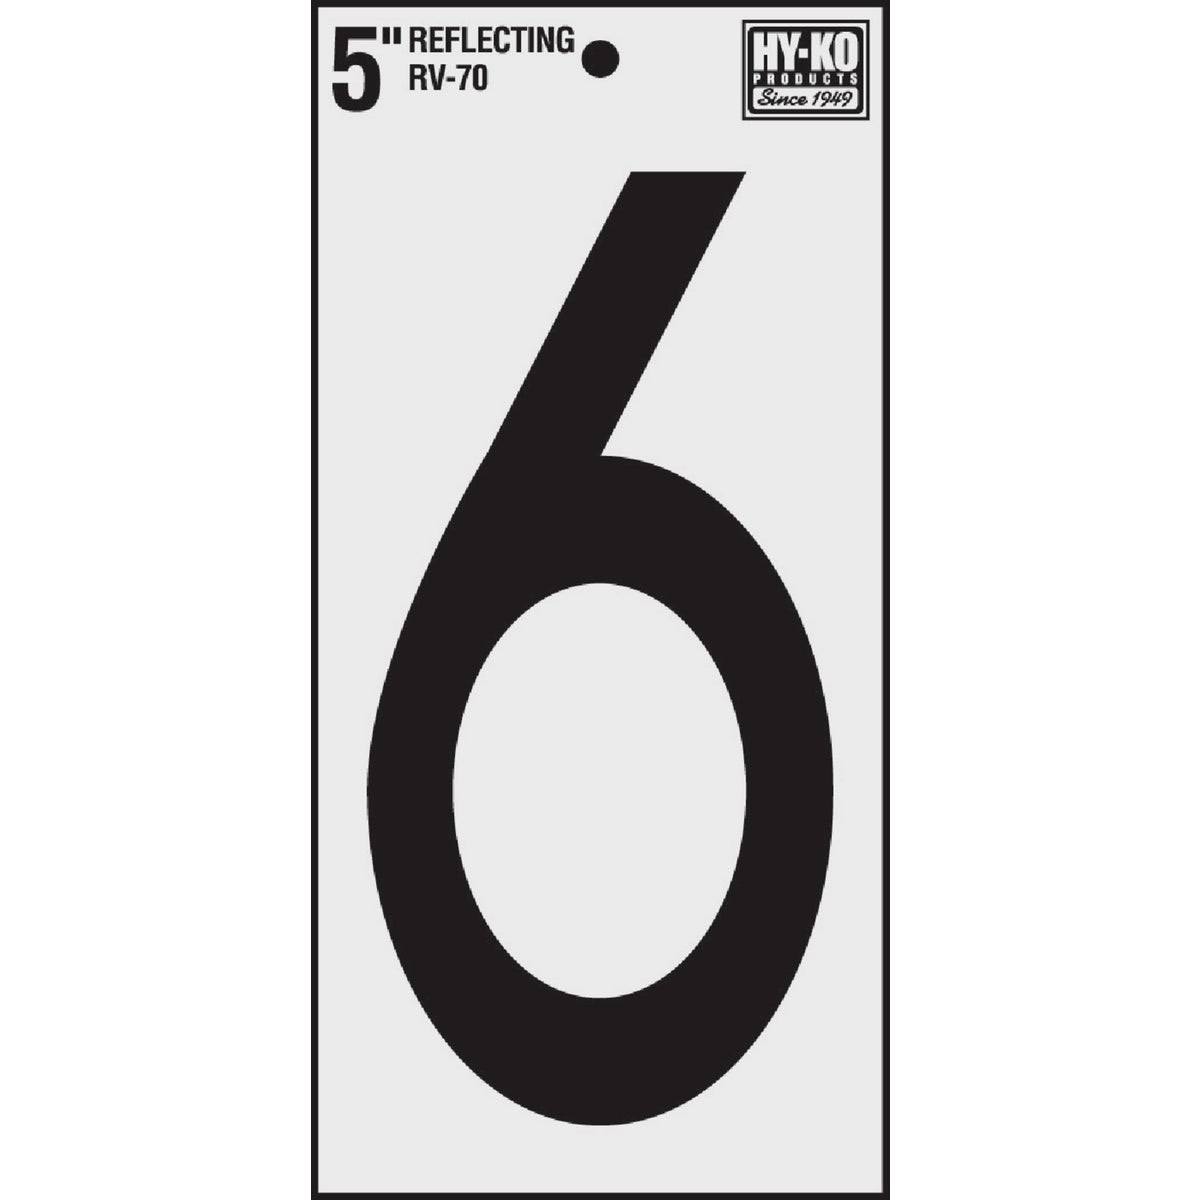 Hy-Ko Products Vinyl Reflective Number - #6, 5"